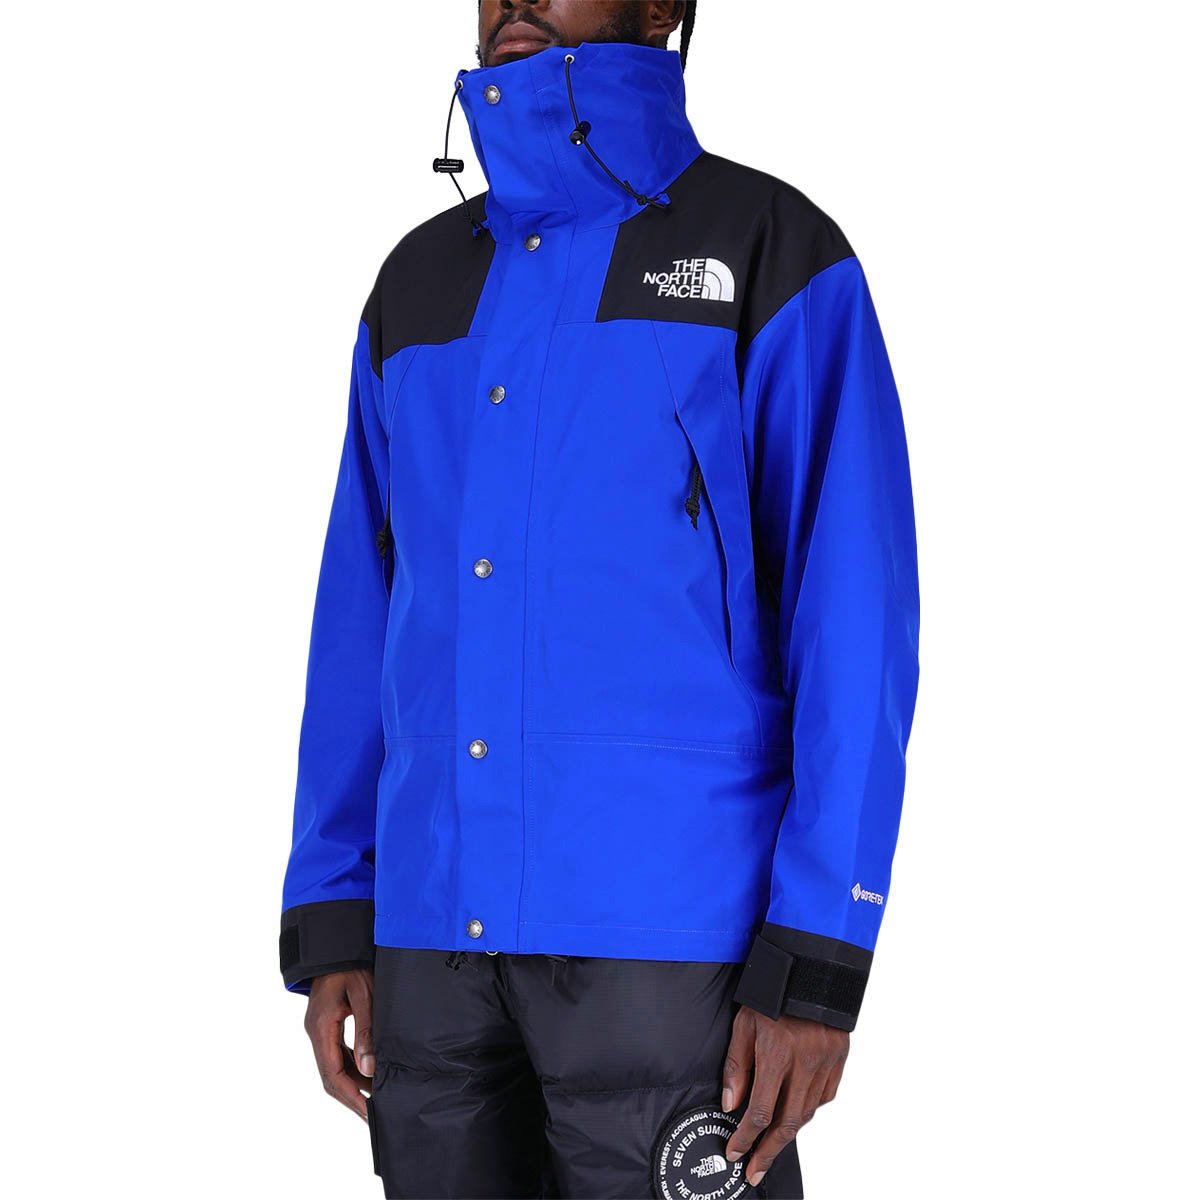 1990 north face